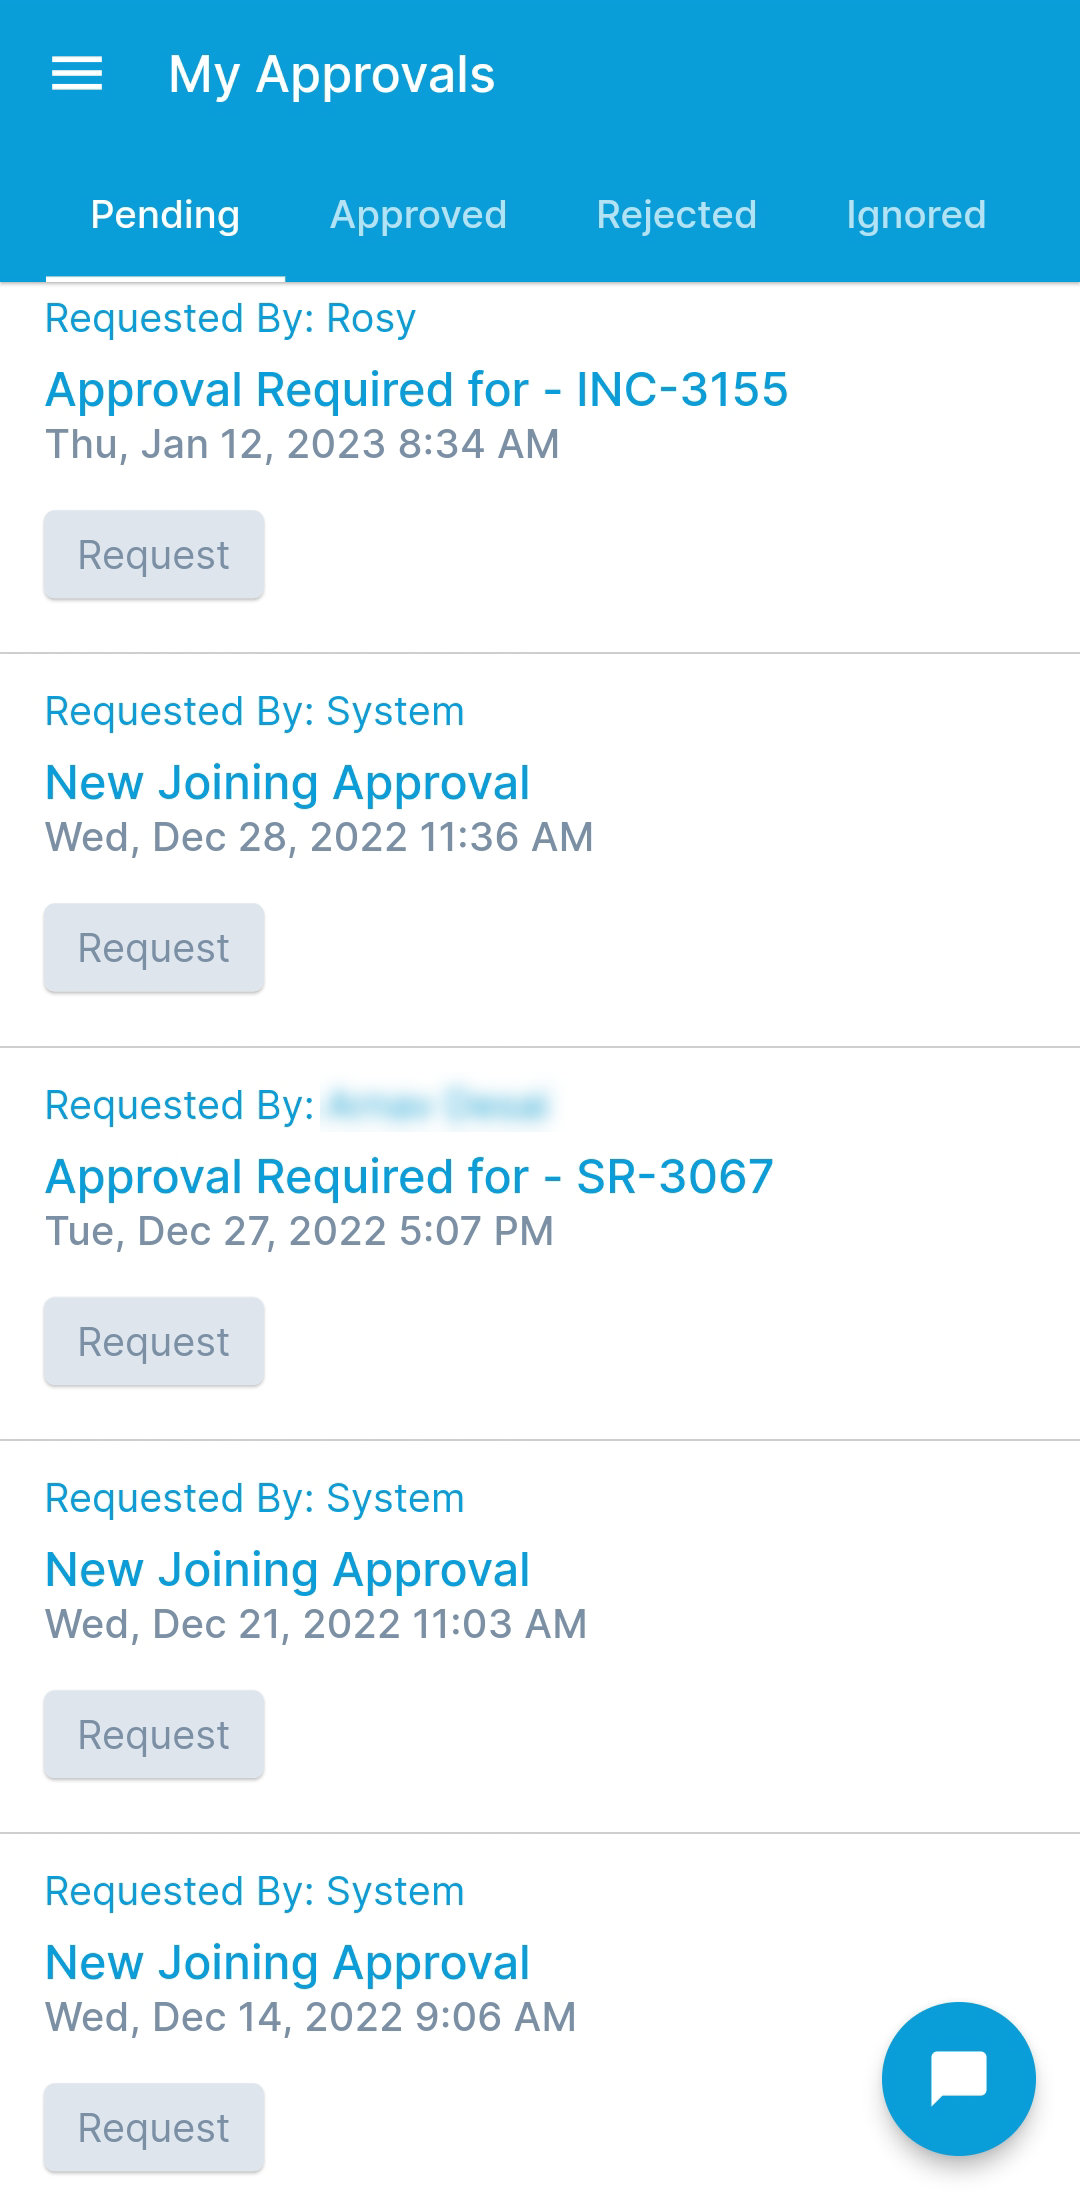 Pending Approvals